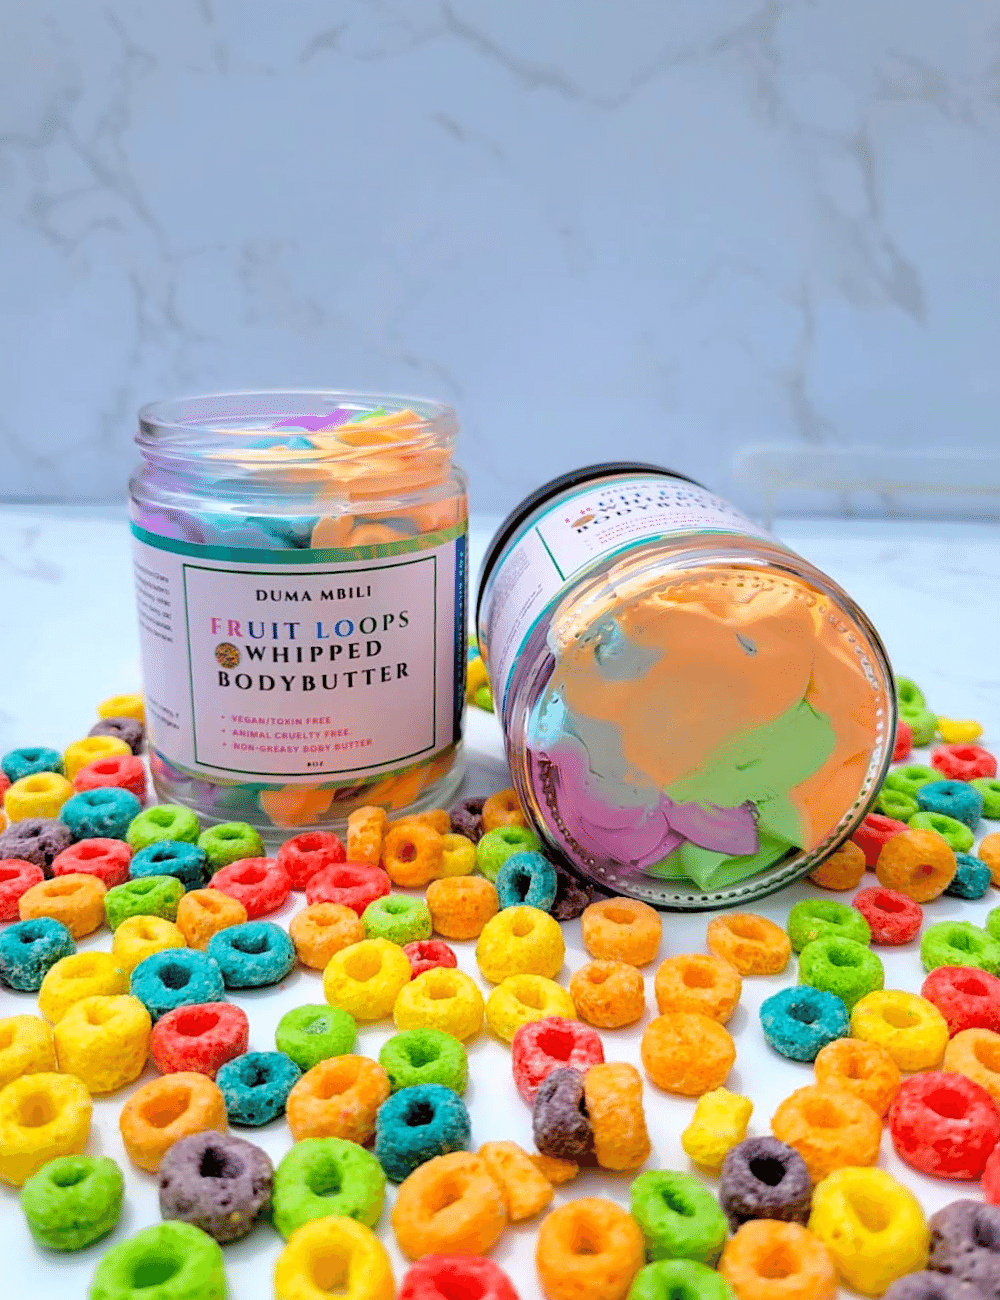 Fruit Loops Whipped Body Butter/dumambili bodybutters/PersonalCare